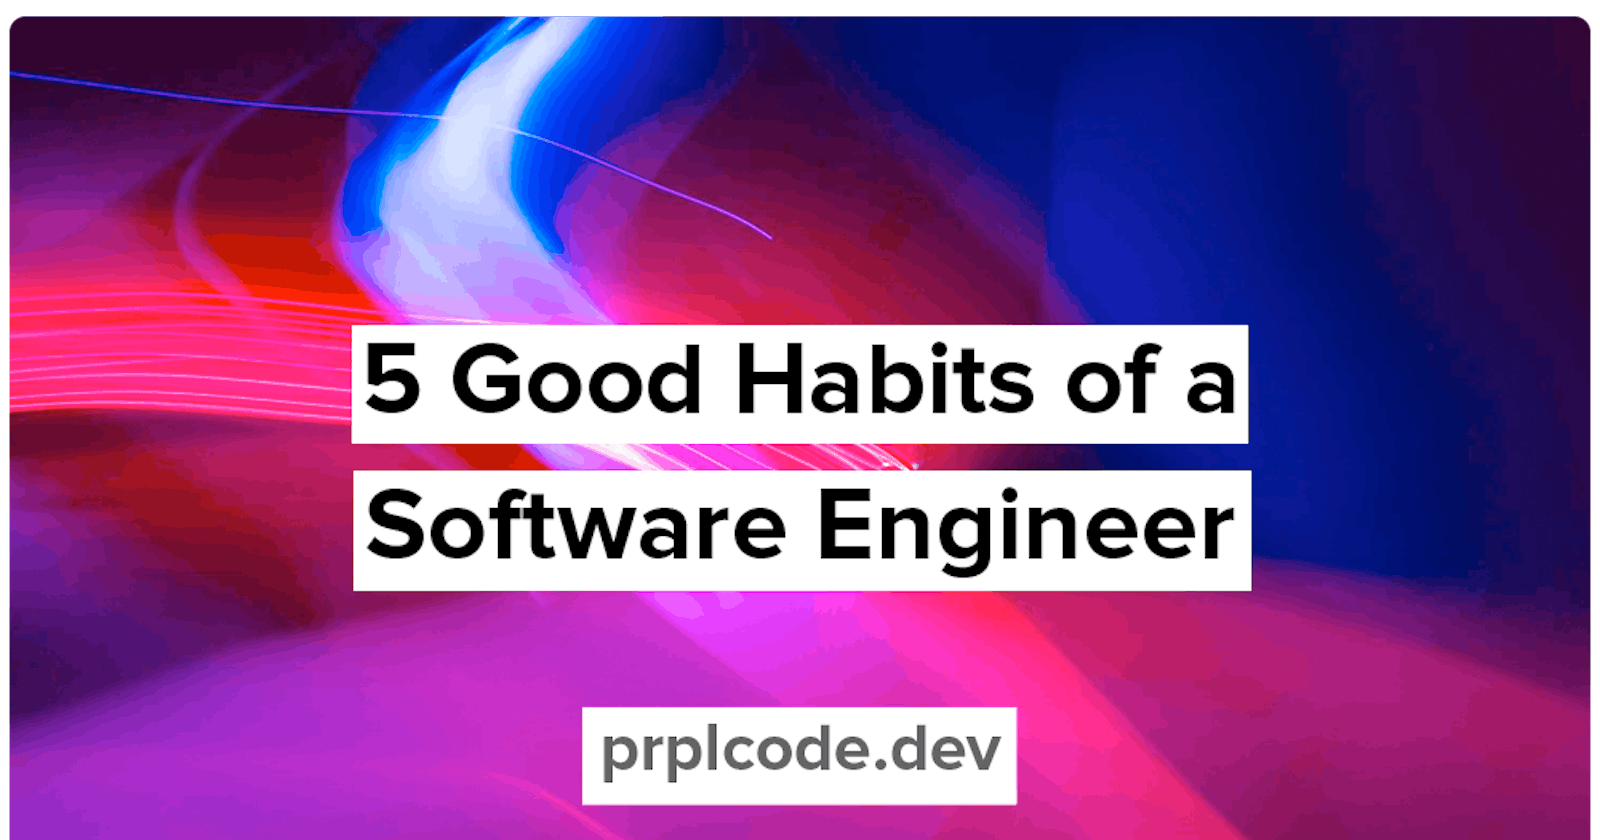 5 Good Habits of a Software Engineer